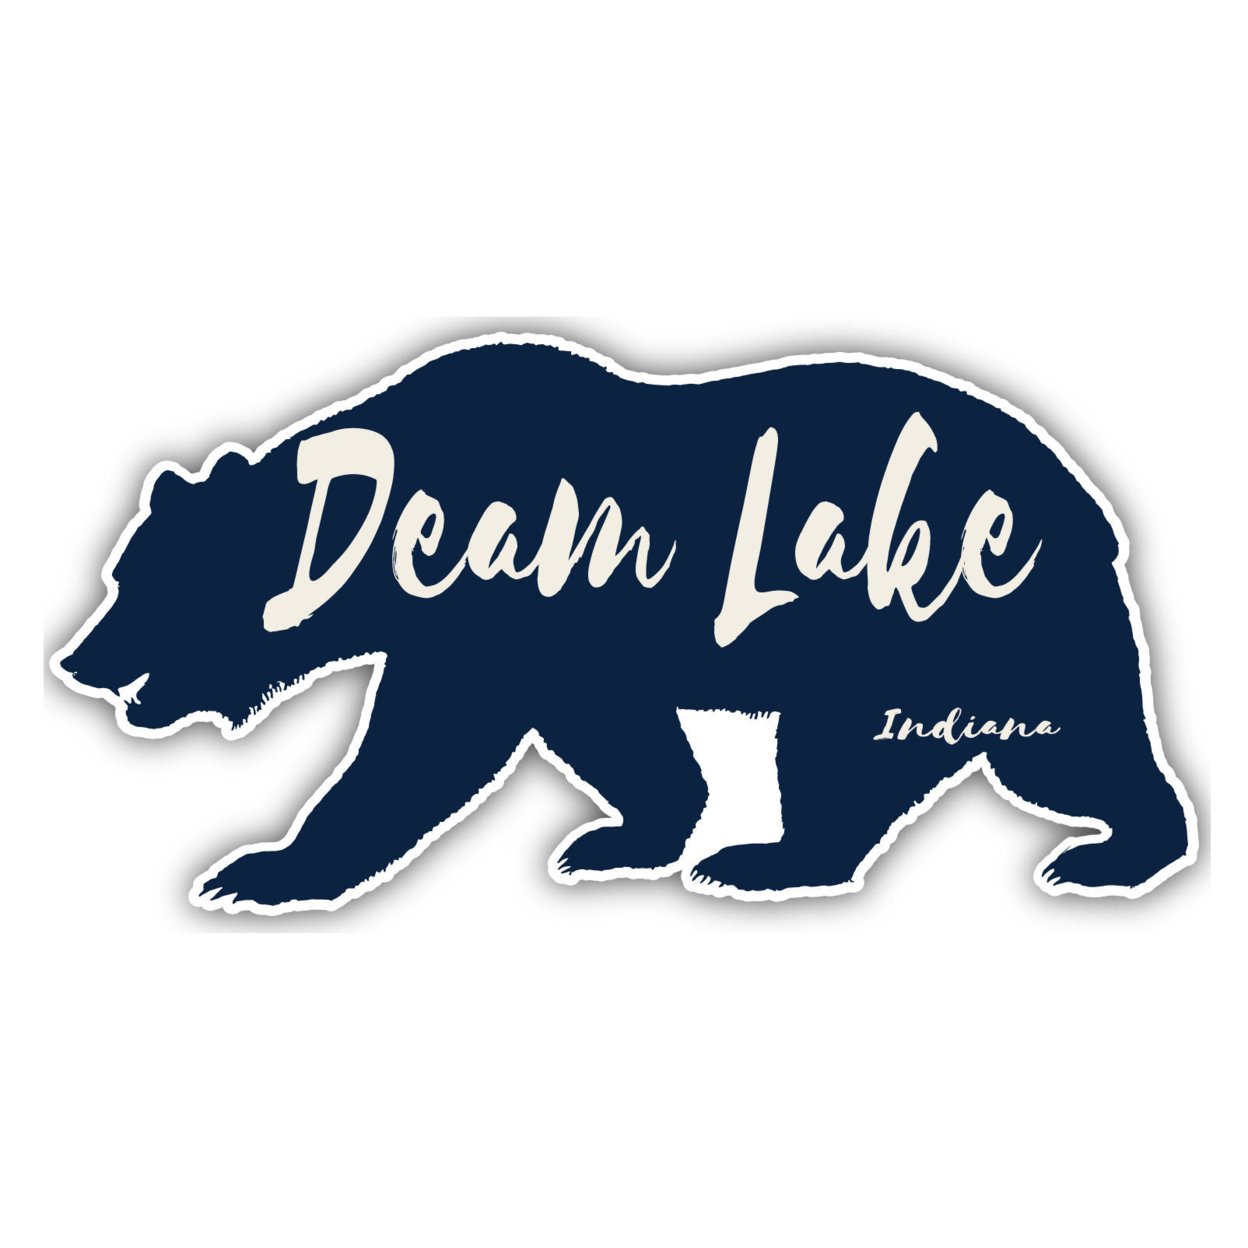 Deam Lake Indiana Souvenir Decorative Stickers (Choose Theme And Size) - 4-Pack, 10-Inch, Bear